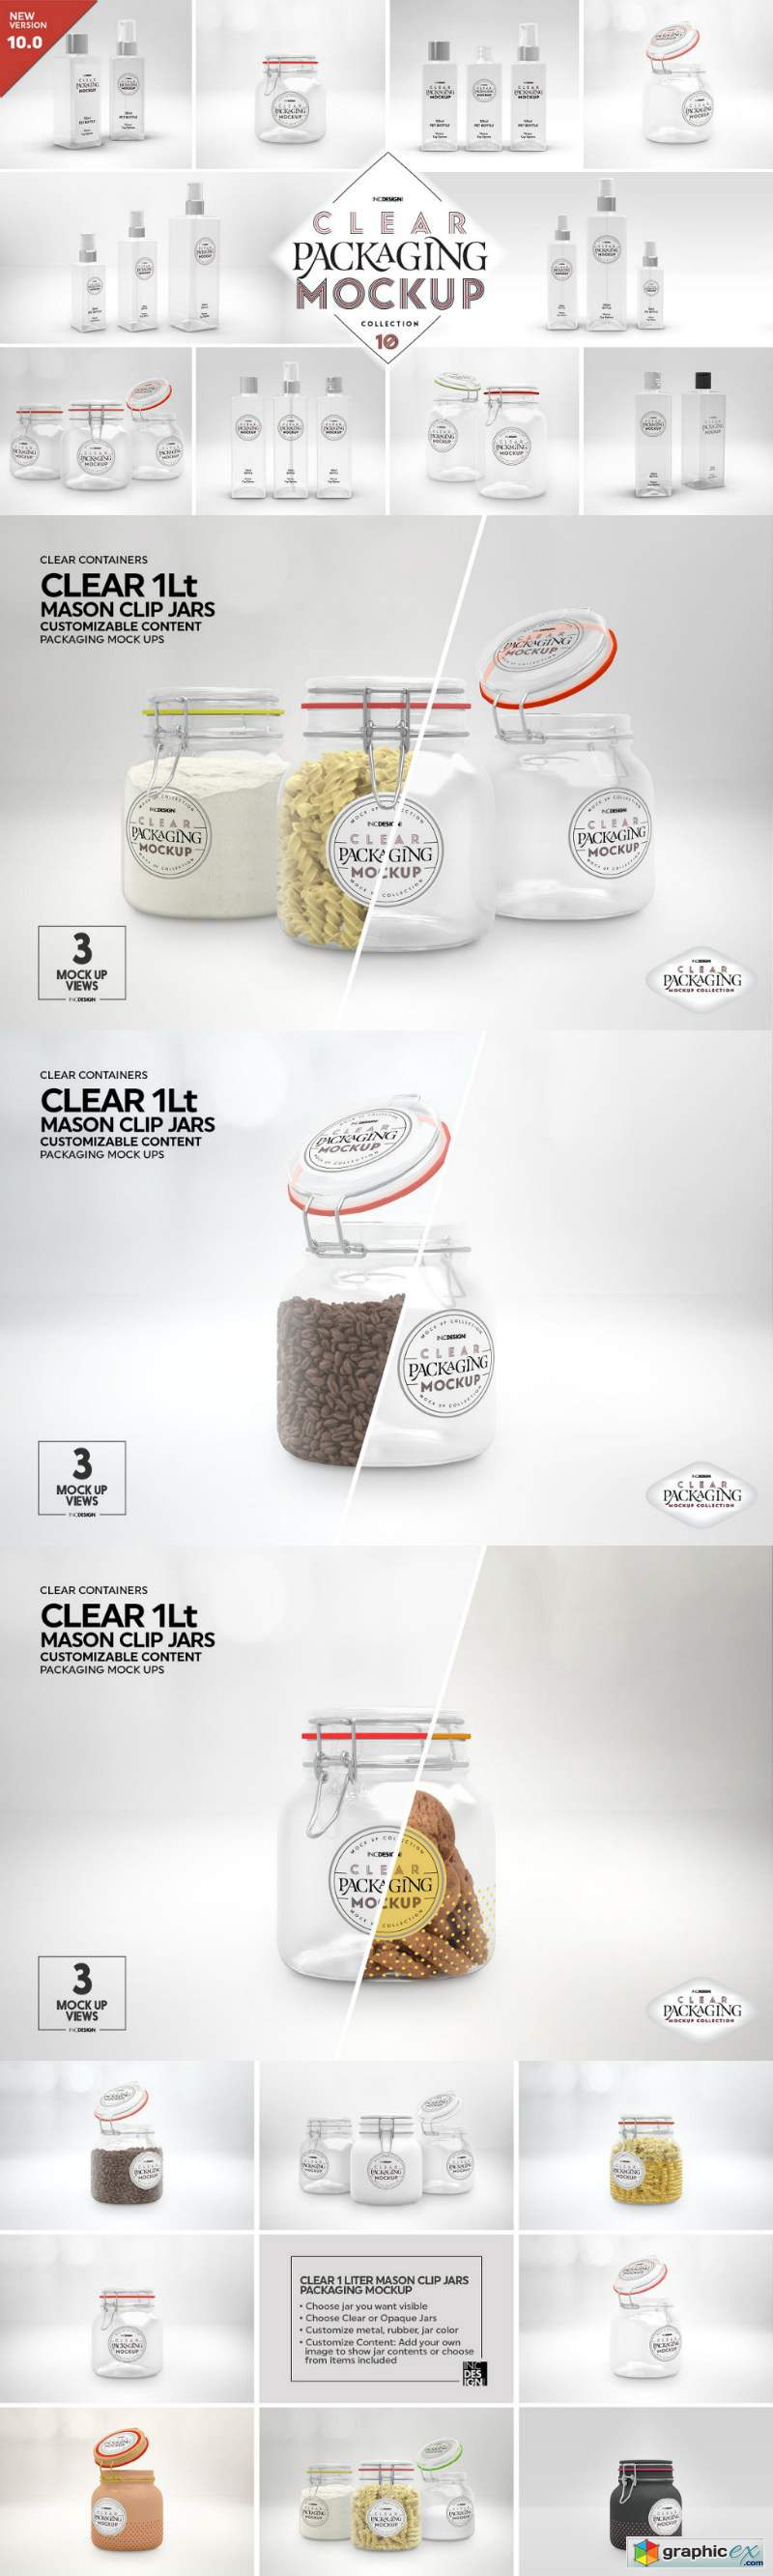 10 Clear Container Packaging Mockups